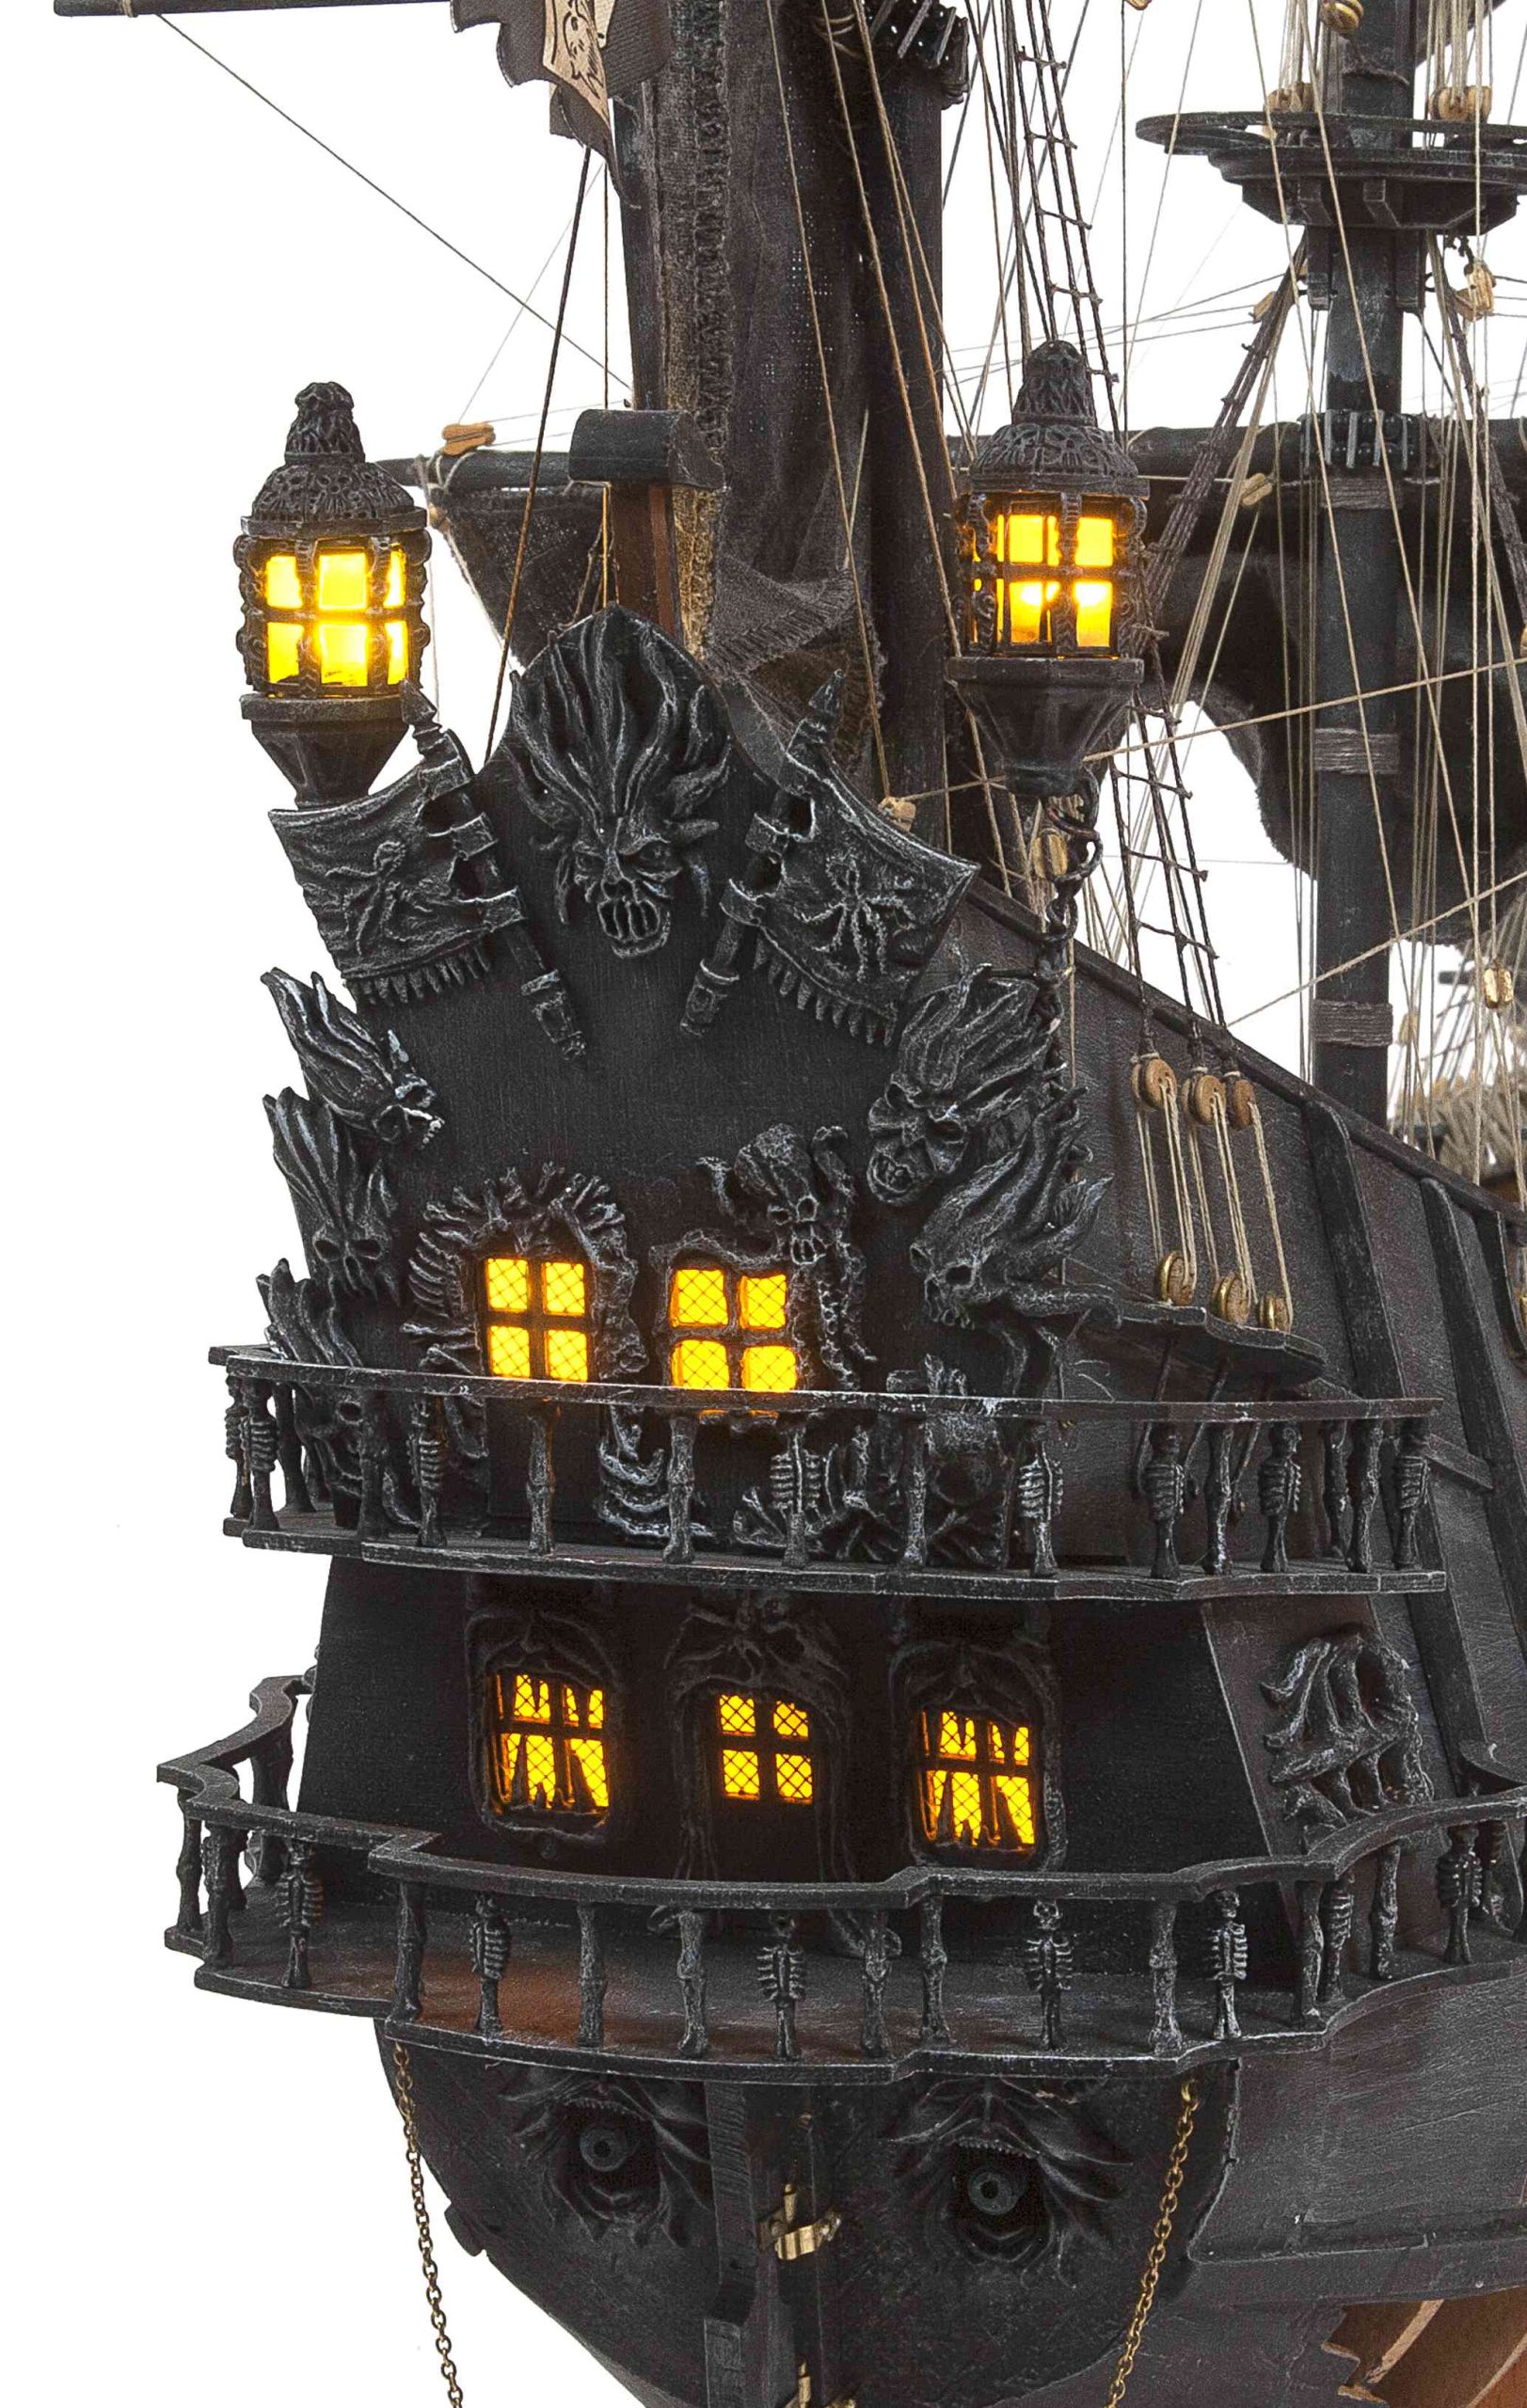 The Flying Dutchman Model Kit - Occre (14010)